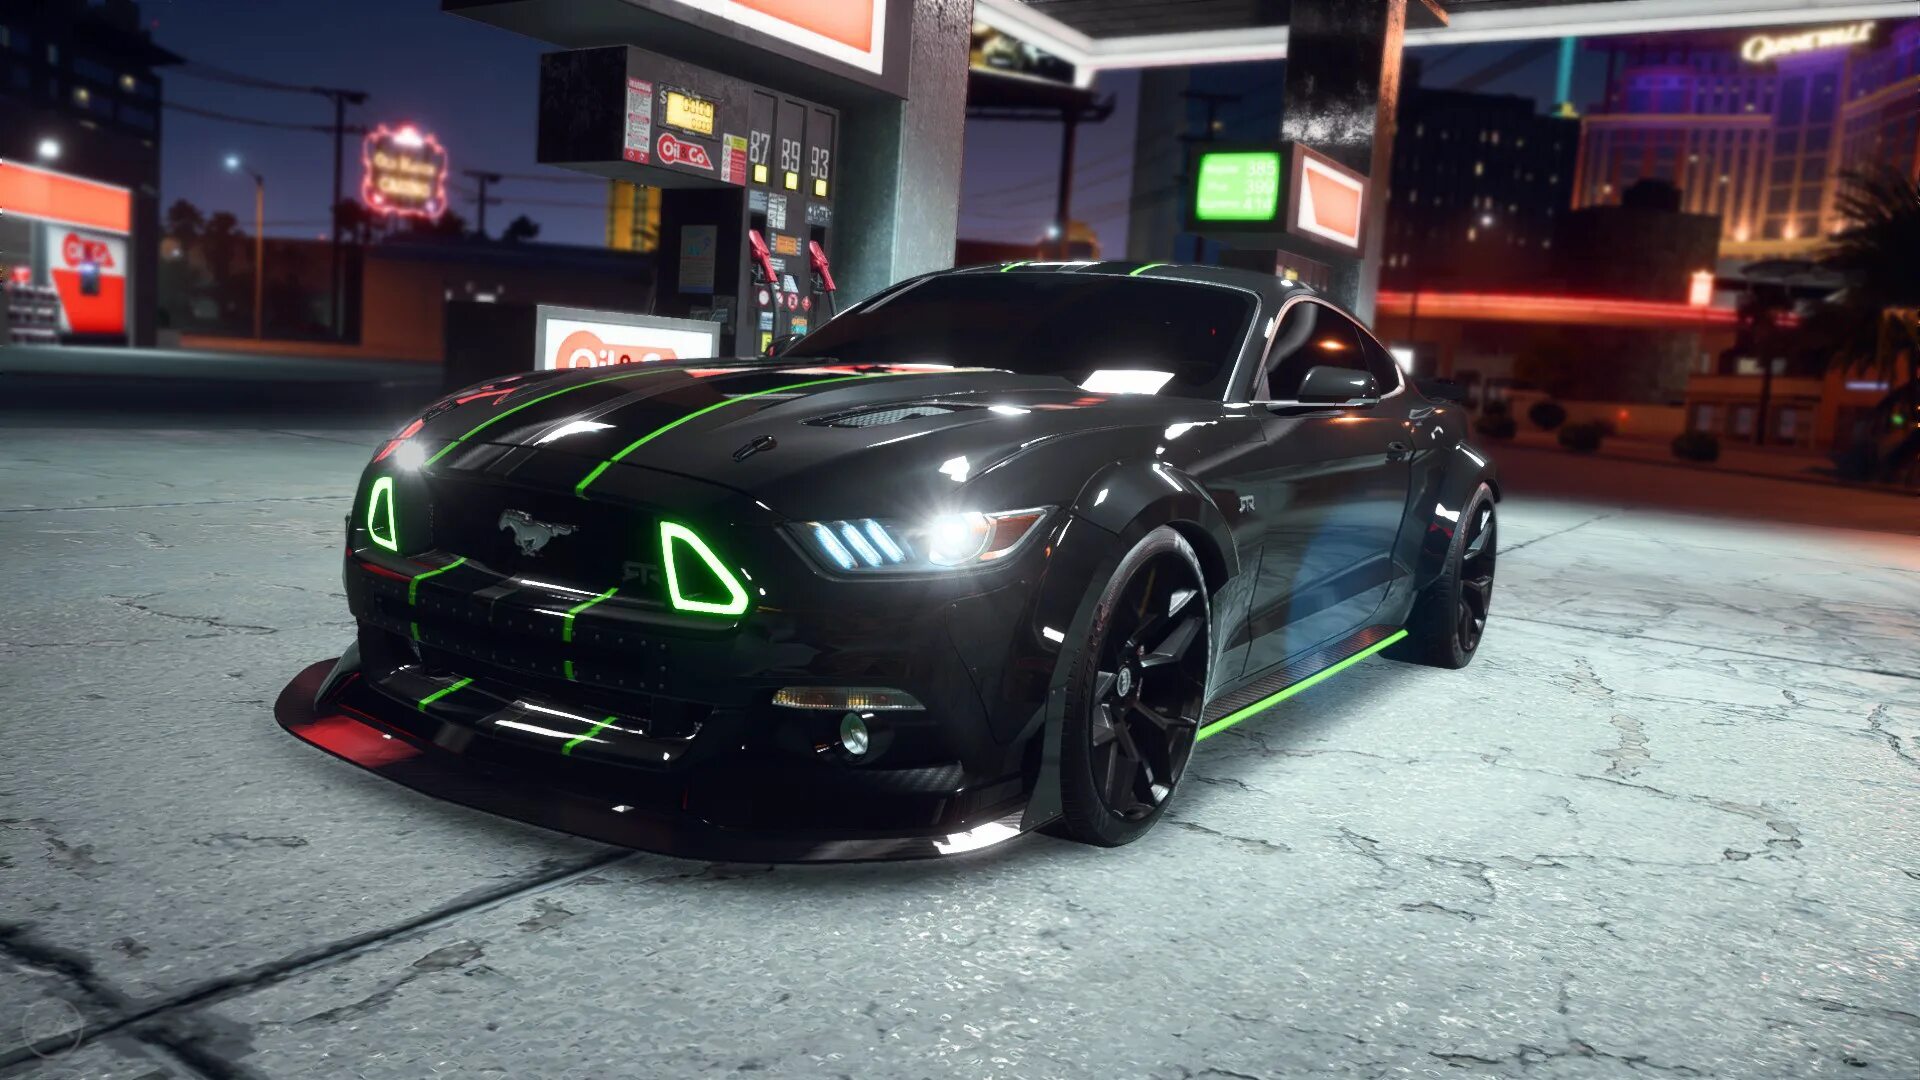 Мустанг payback. Ford Mustang RTR spec 3. Ford Mustang RTR 2015 Payback. Ford Mustang RTR NFS Payback. Ford Mustang gt 2015 NFS 2015.